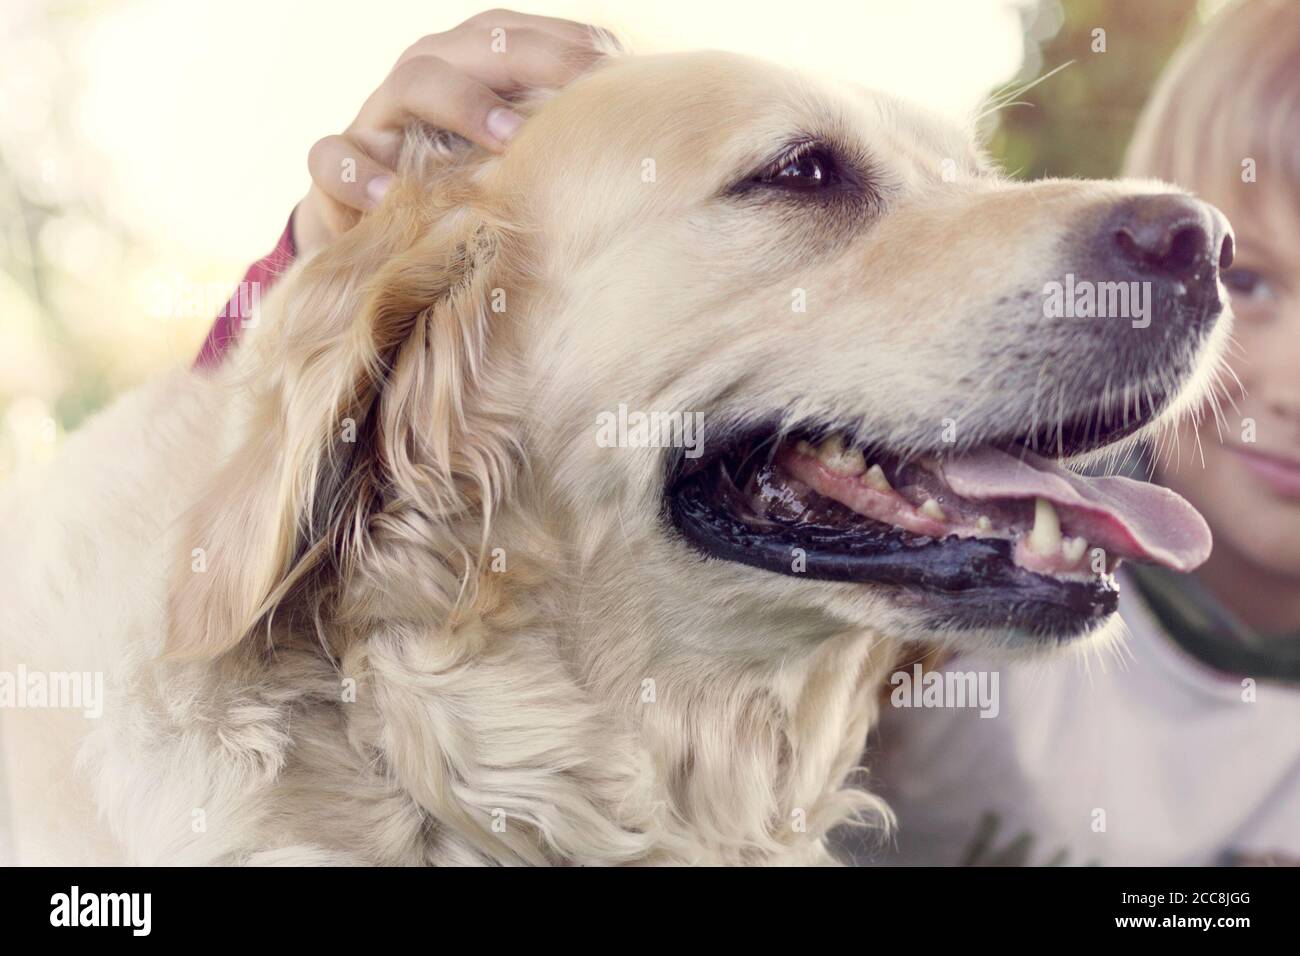 Little boy caresses his dog with sweetness Stock Photo